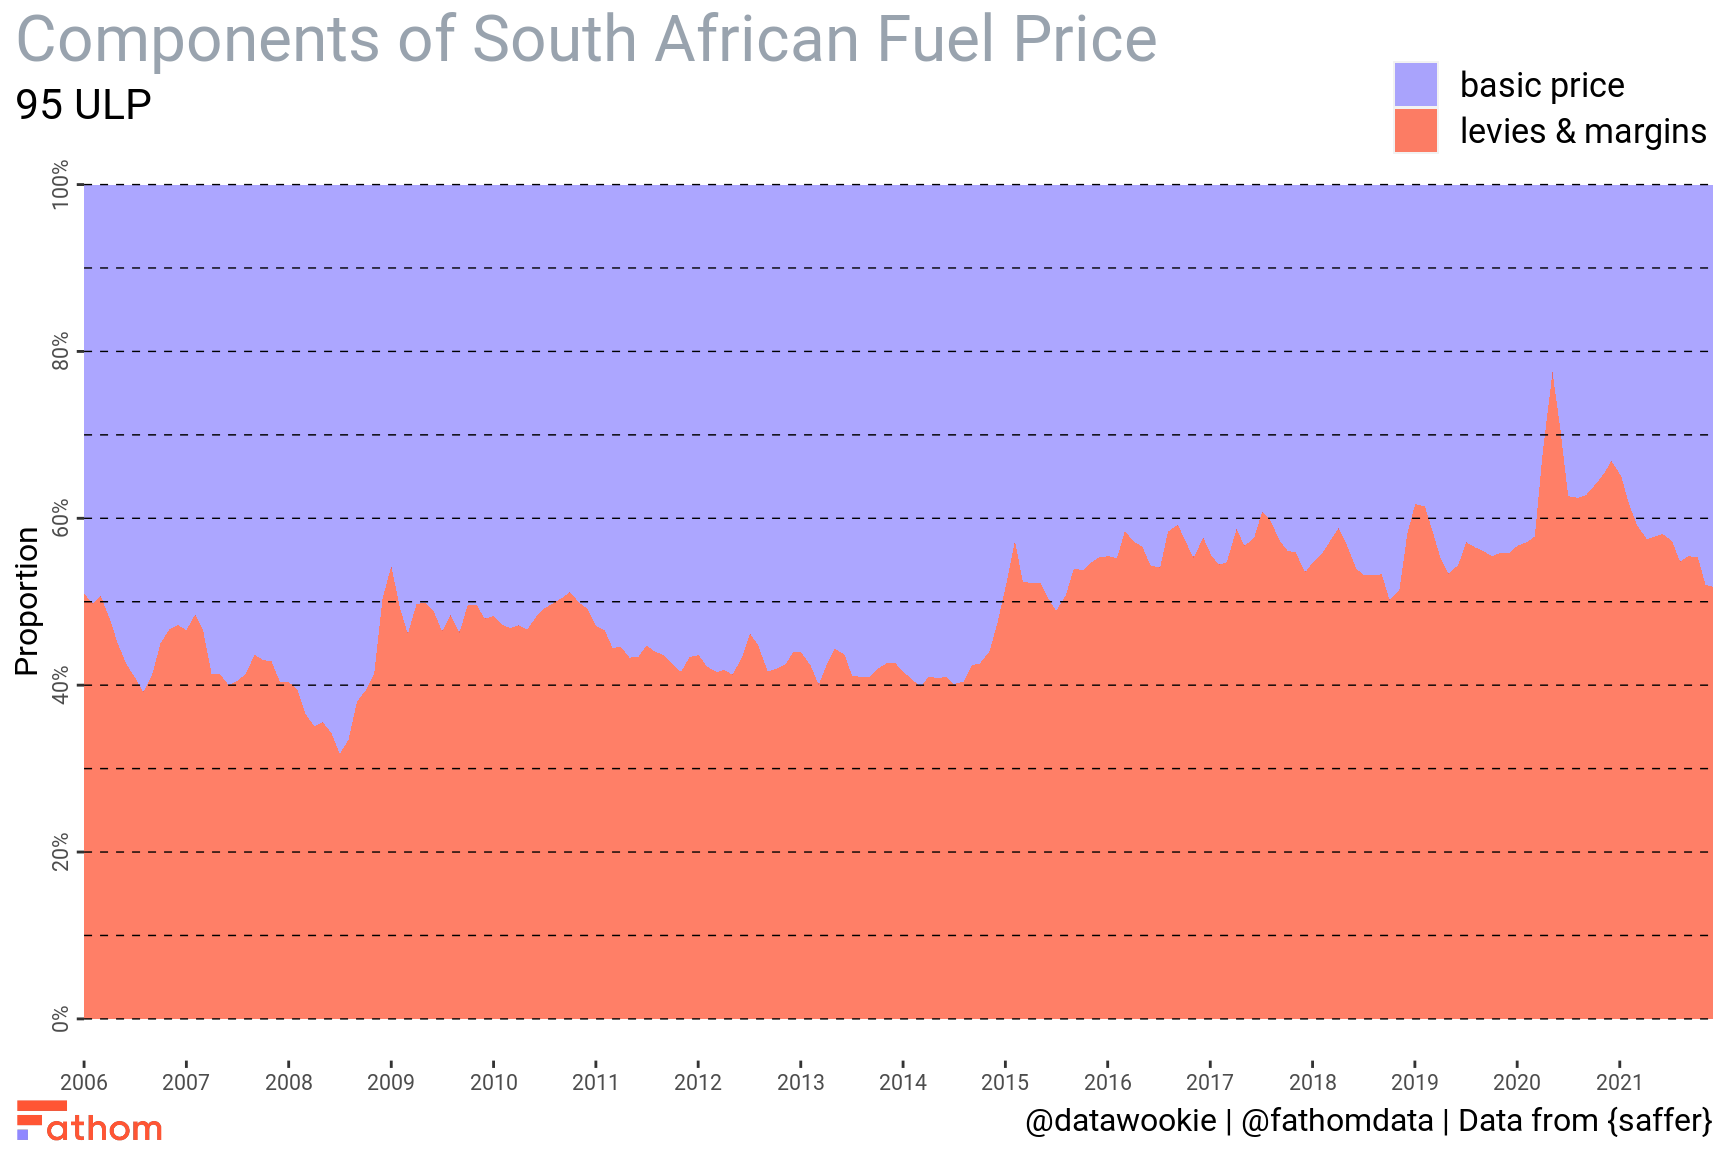 Components of the South African fuel price as a (normalised) stacked area chart.